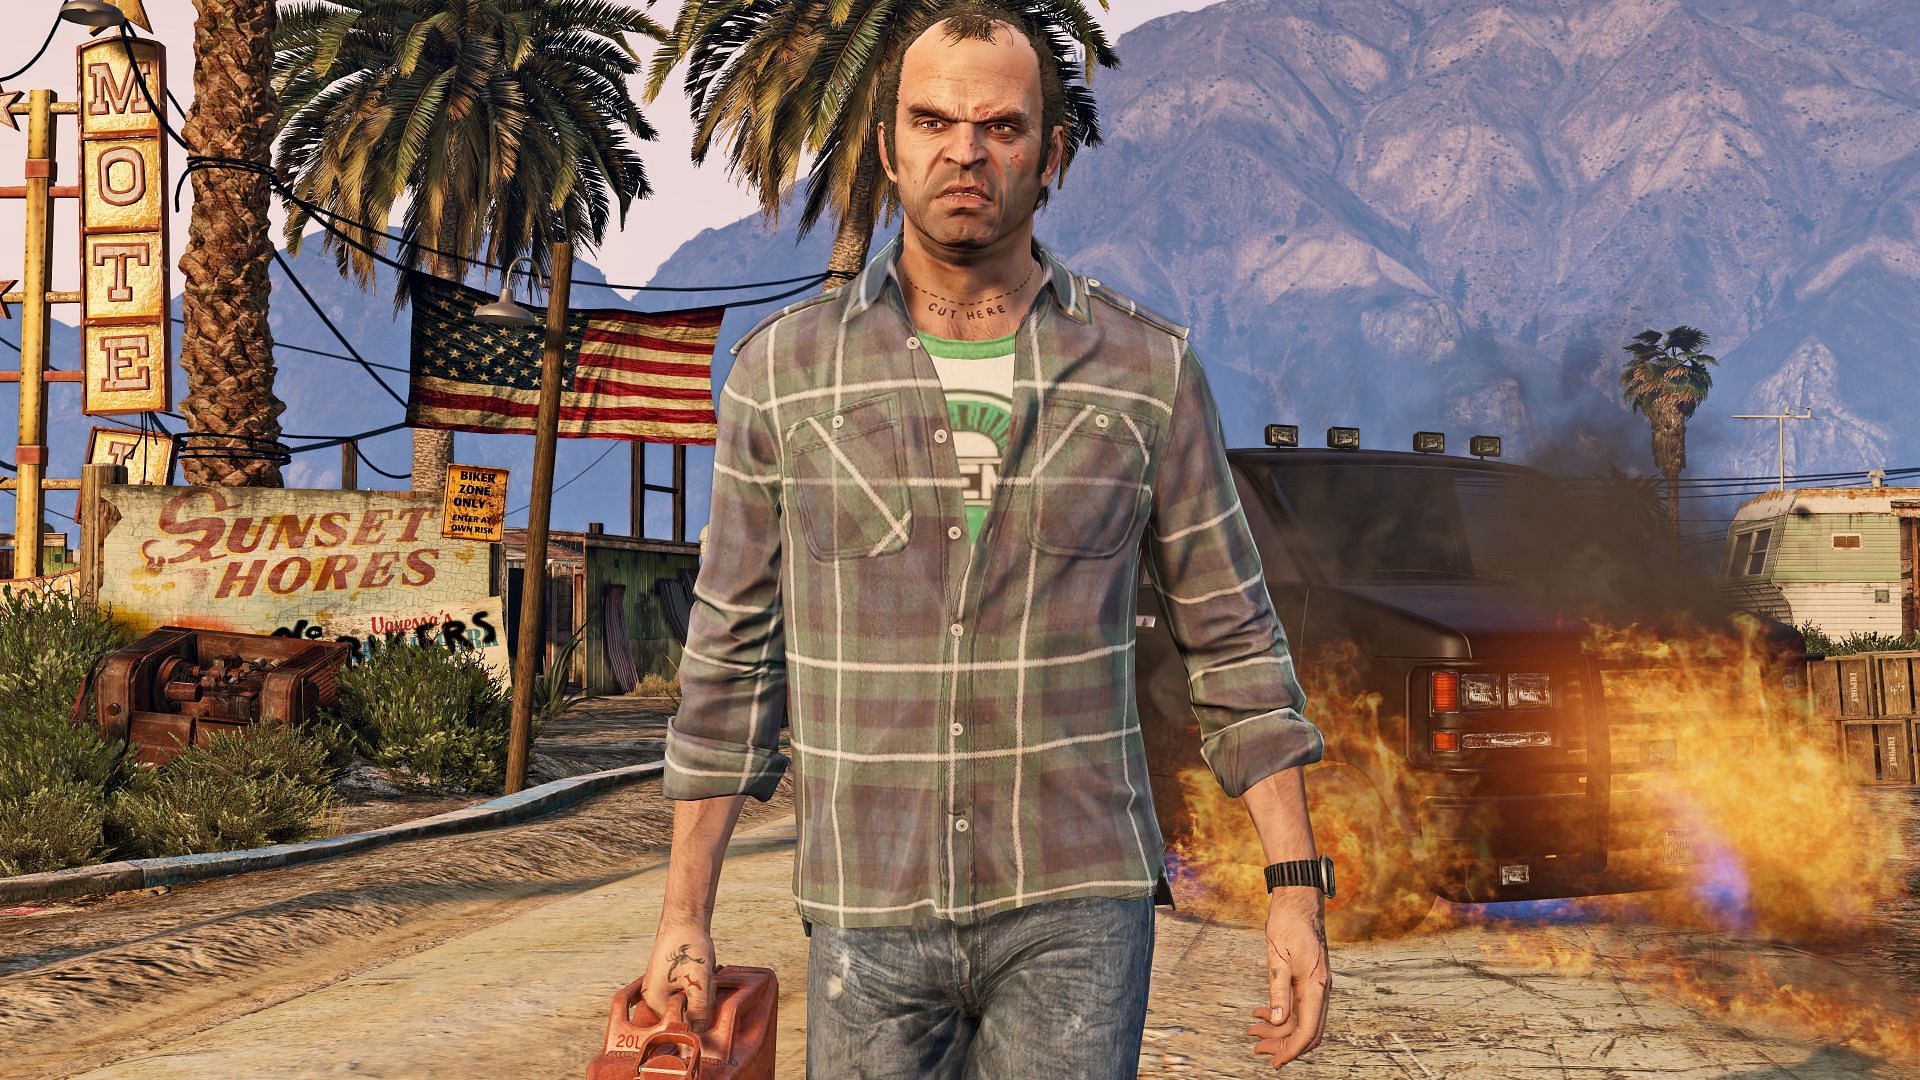 GTA V is one of the most-played PS4 games from the last decade (Image via Rockstar Games)